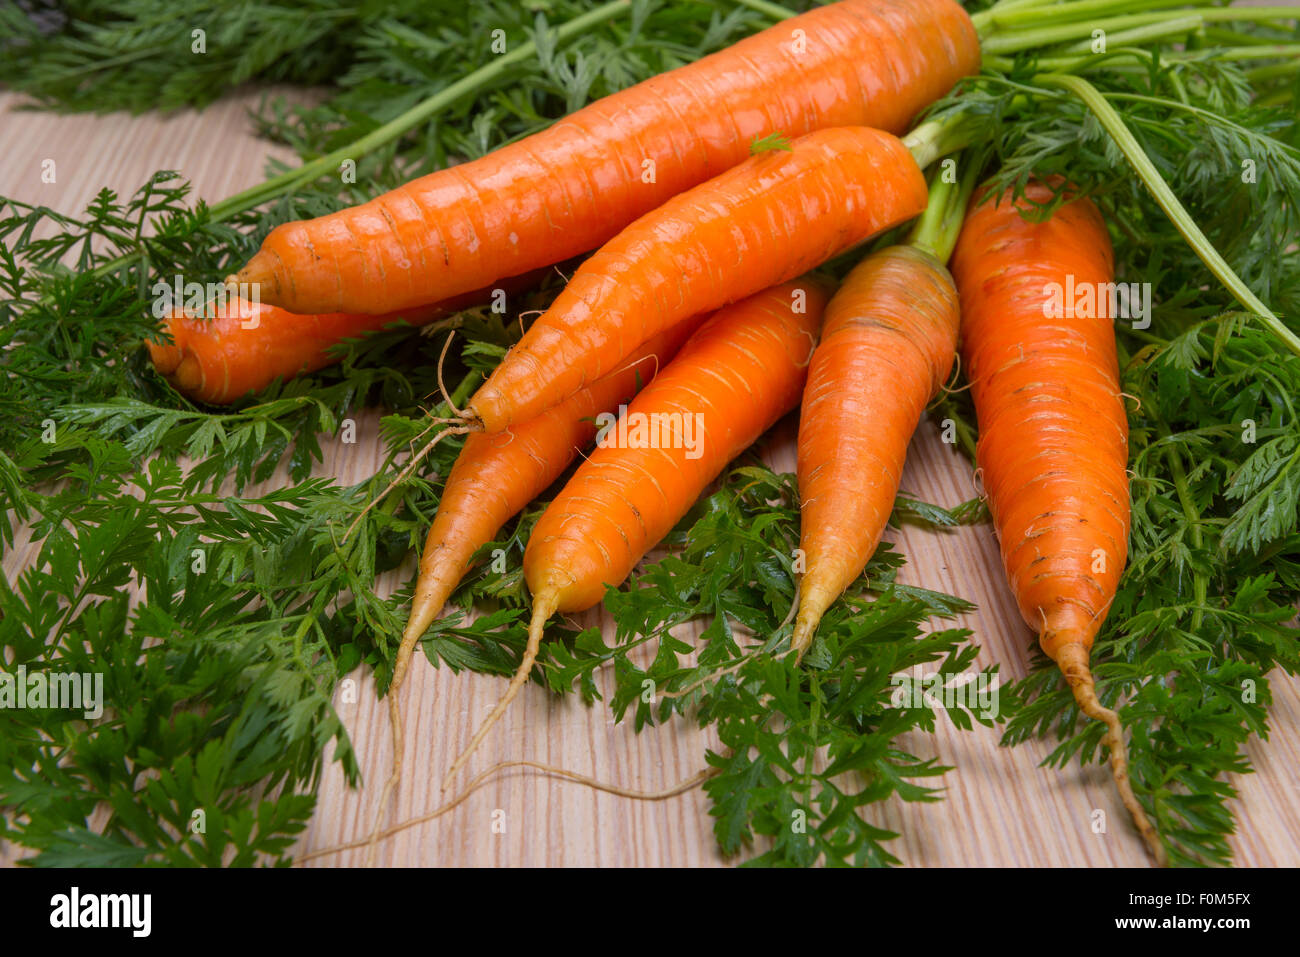 Fresh carrots with tops of vegetable on the wooden table Stock Photo